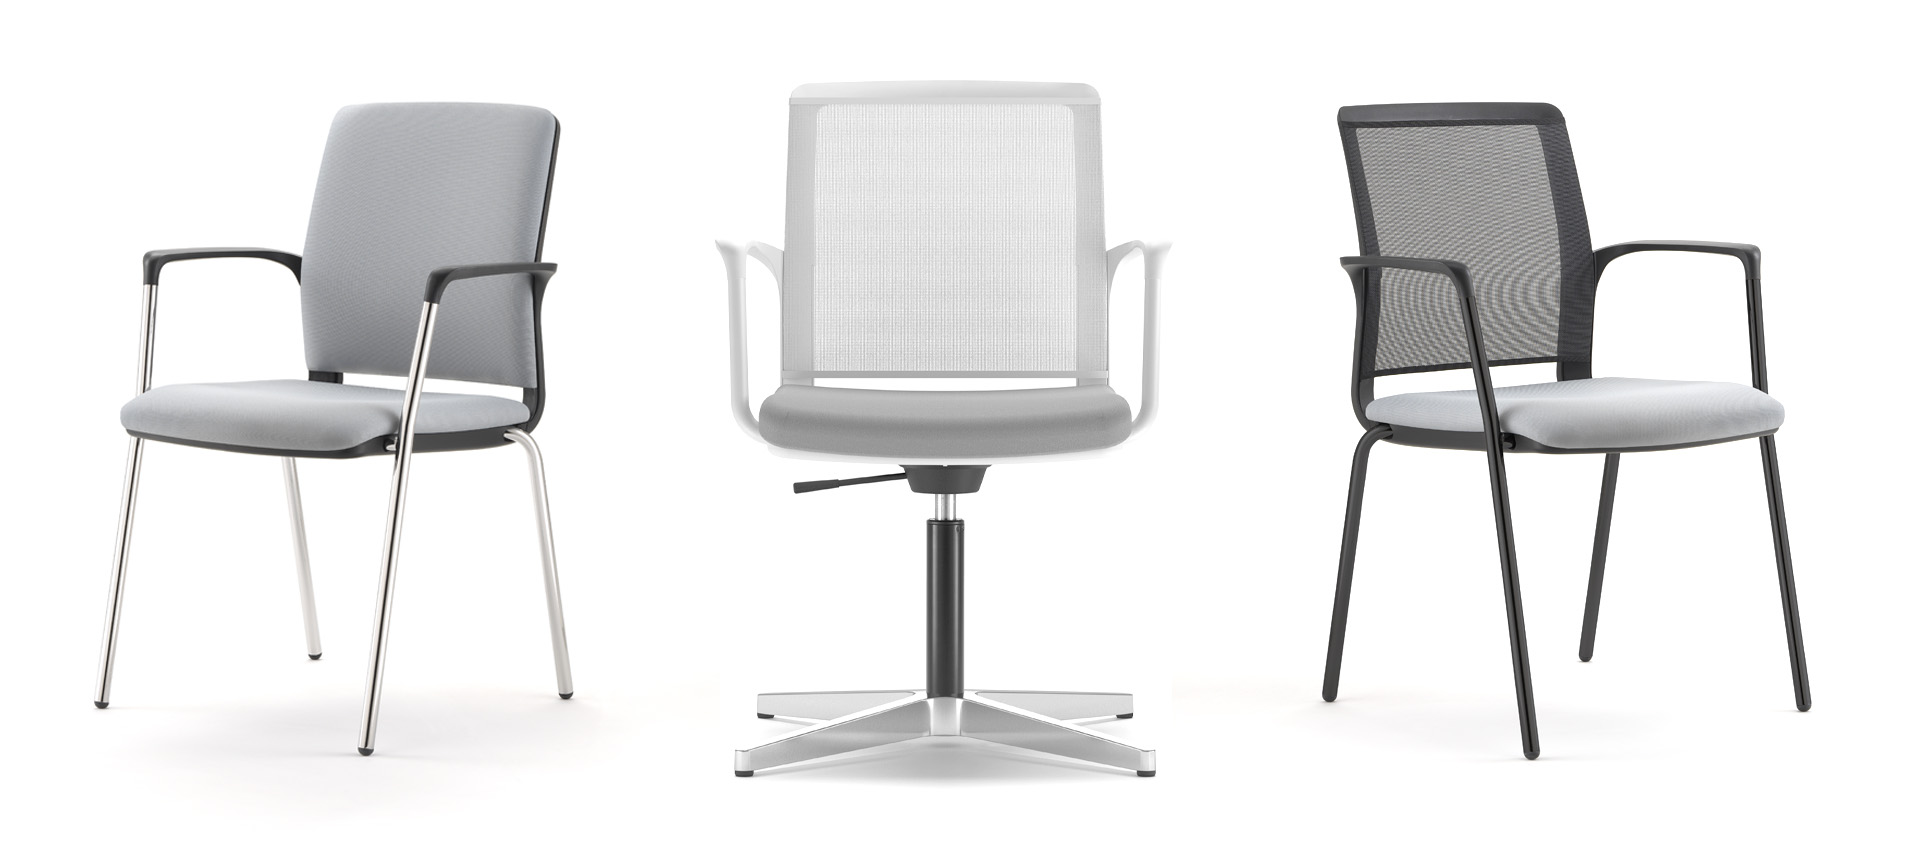 Madrid mesh and upholstered meeting chairs